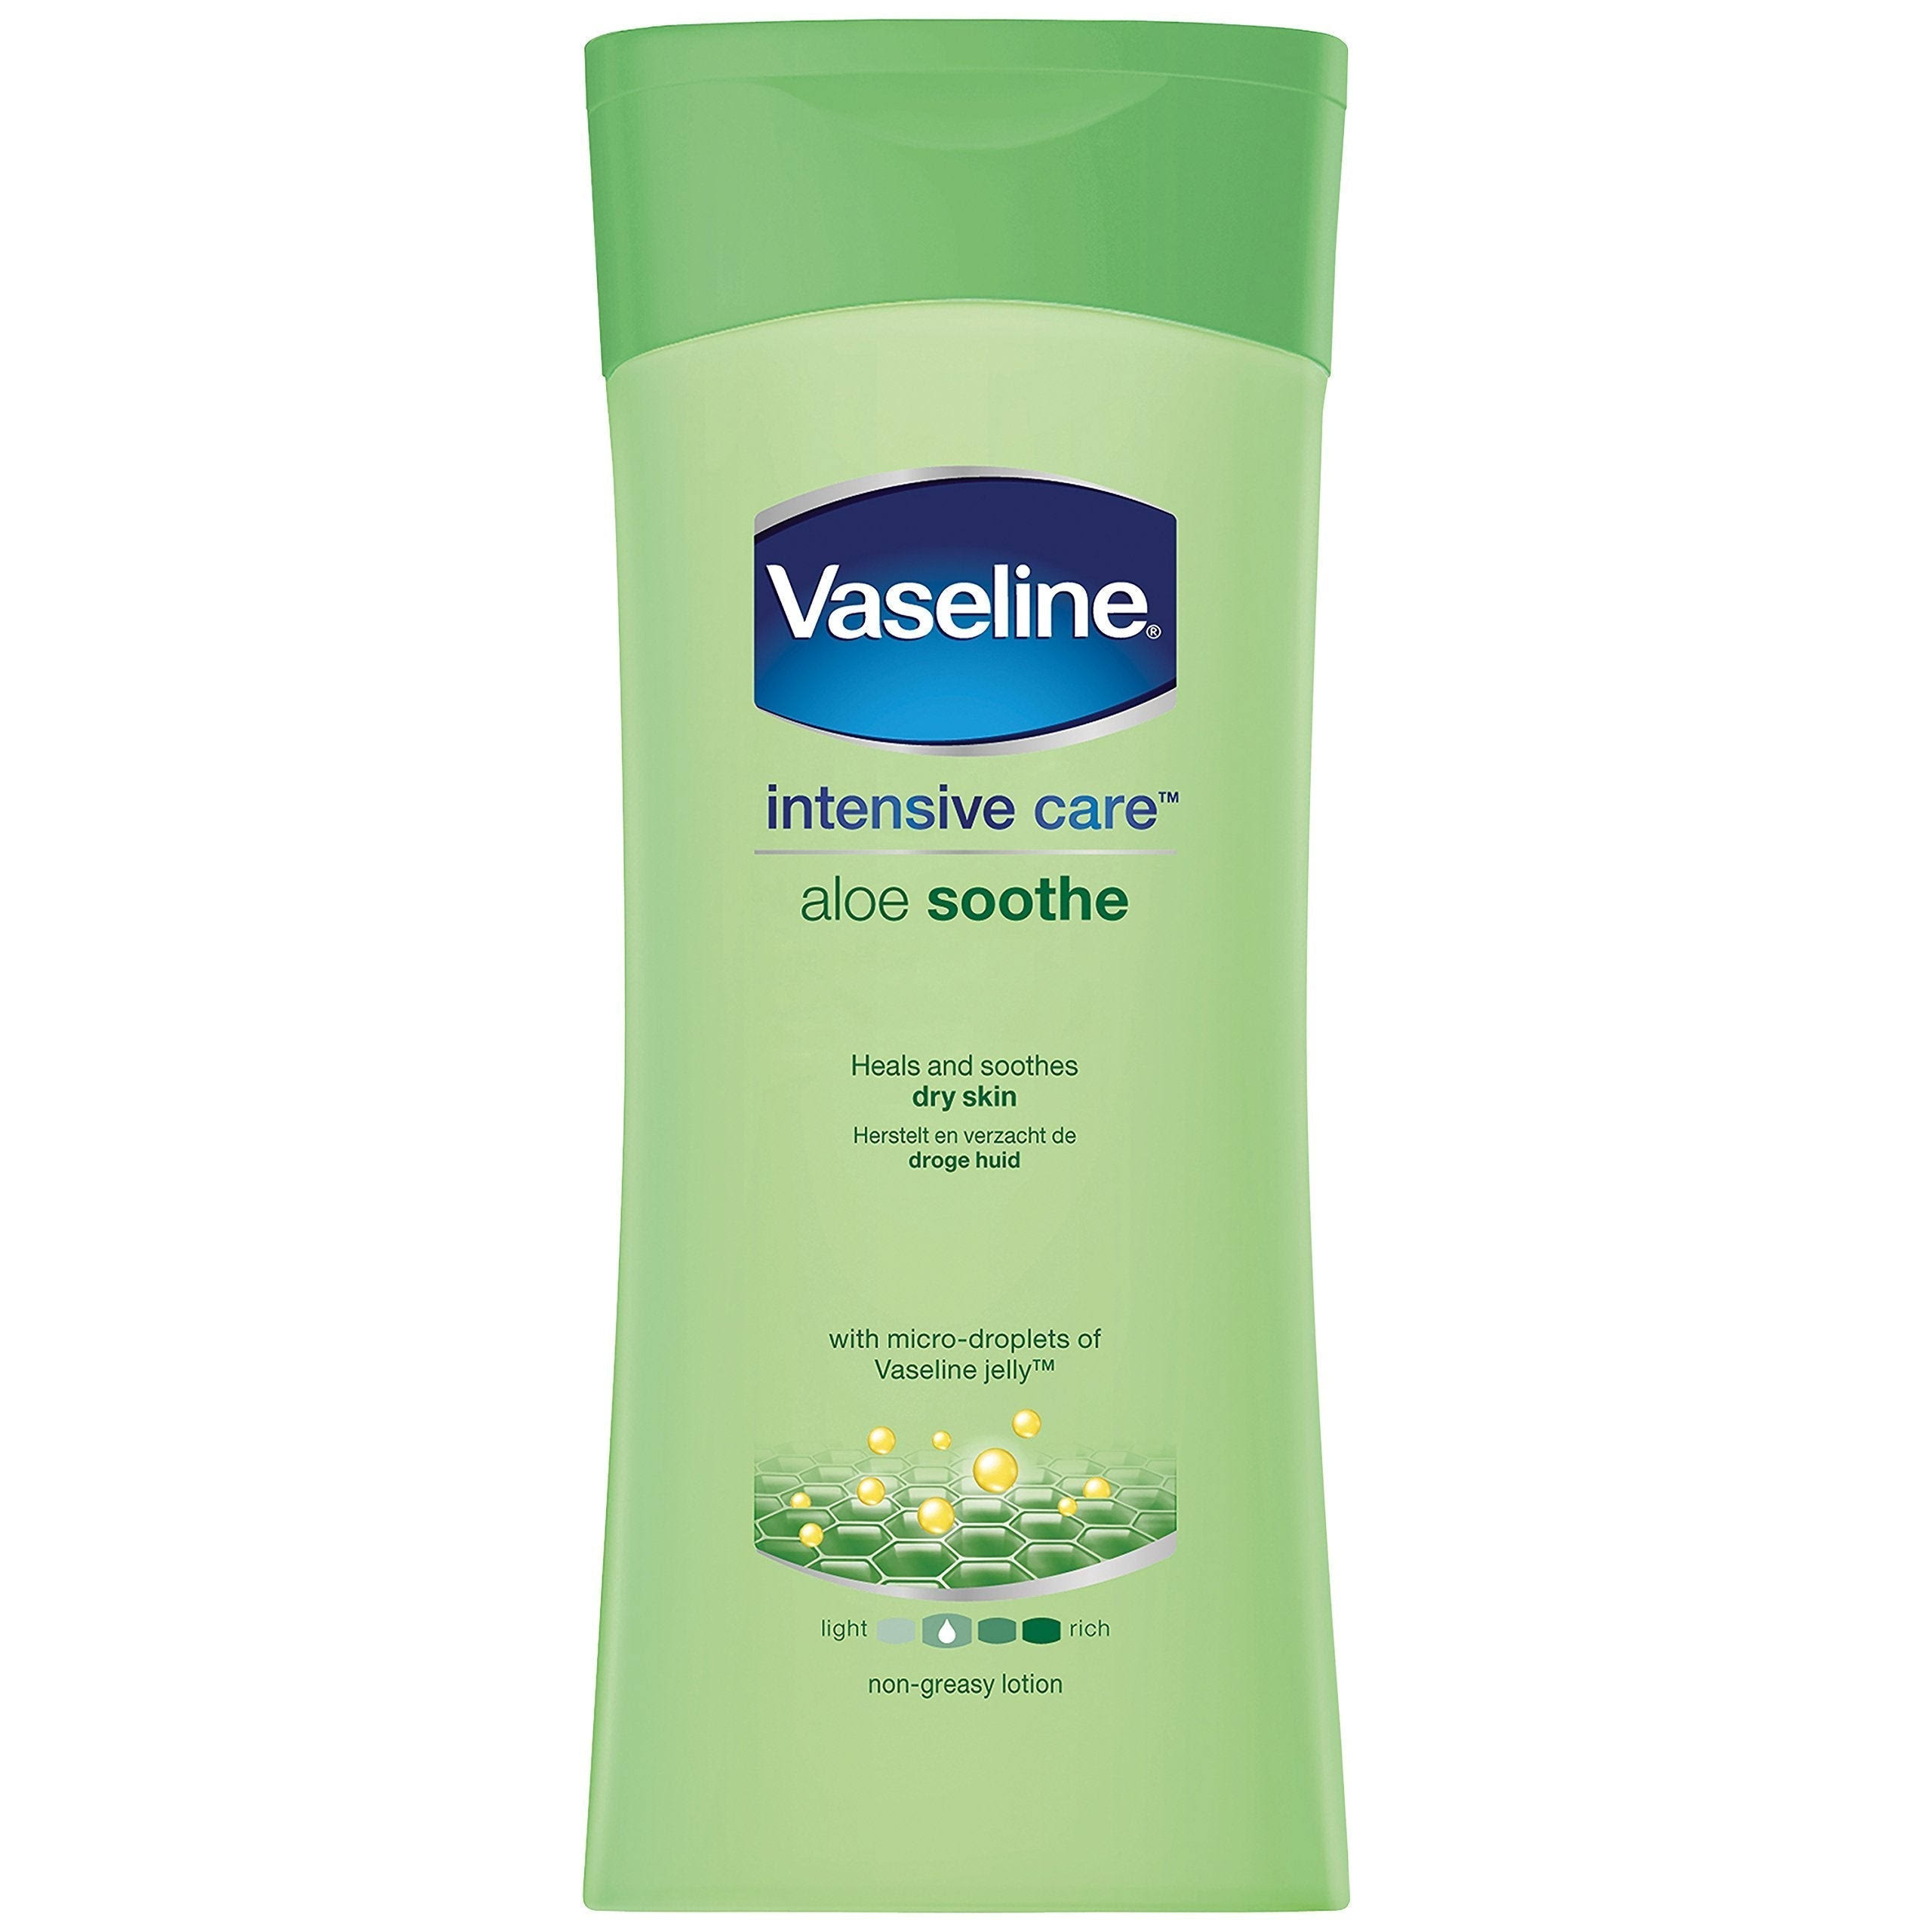 Vaseline Intensive Care Body Lotion - Aloe Soothe, 400ml